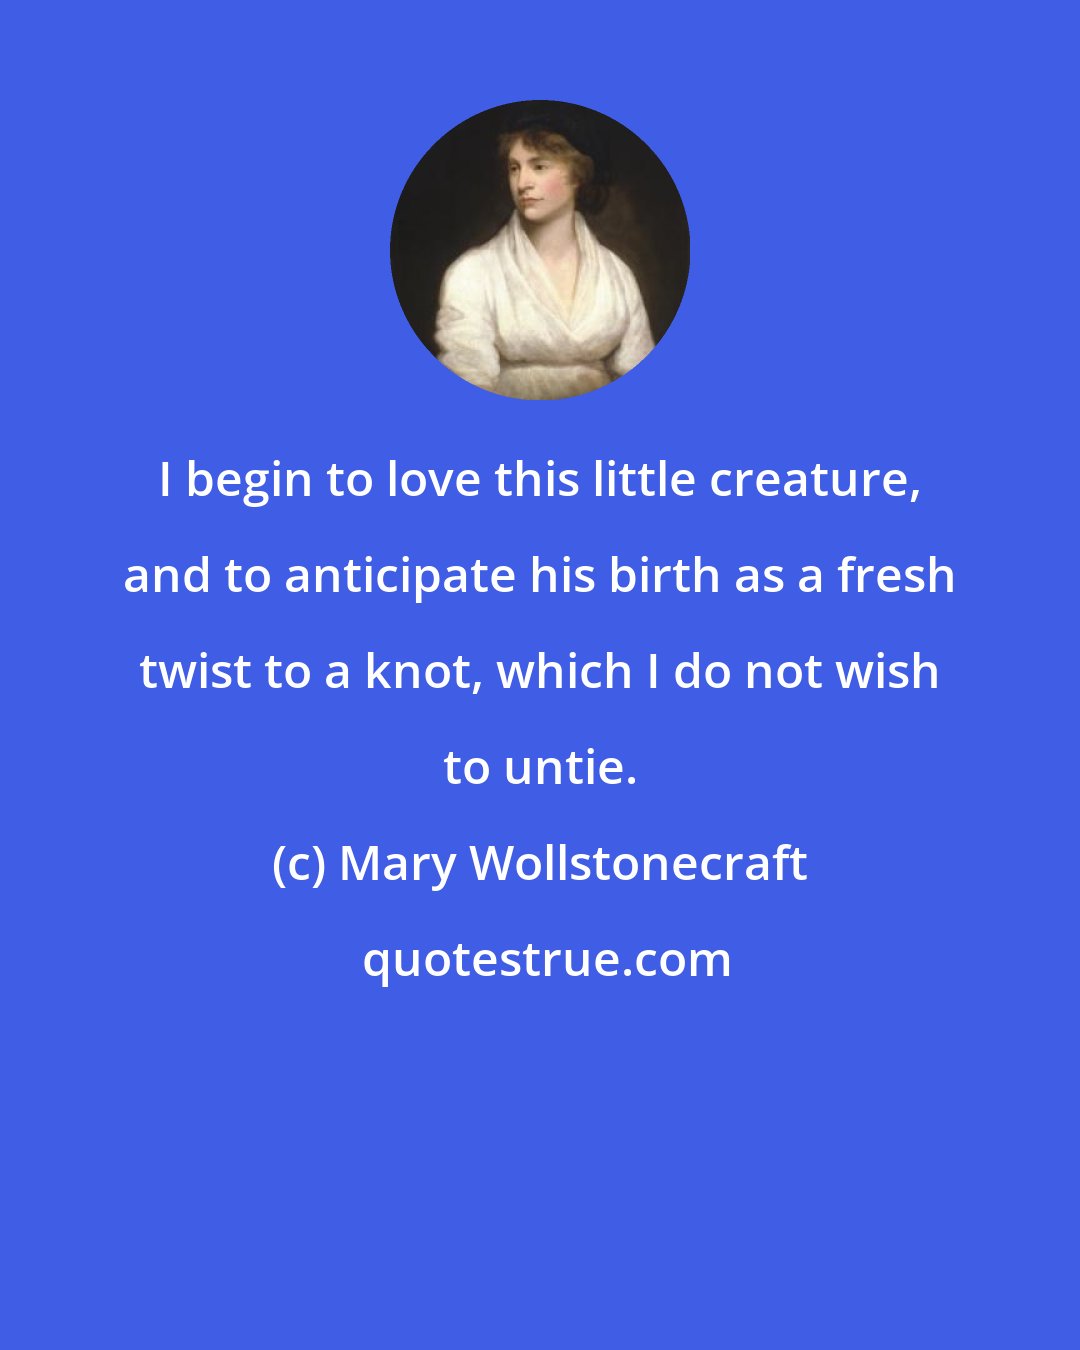 Mary Wollstonecraft: I begin to love this little creature, and to anticipate his birth as a fresh twist to a knot, which I do not wish to untie.